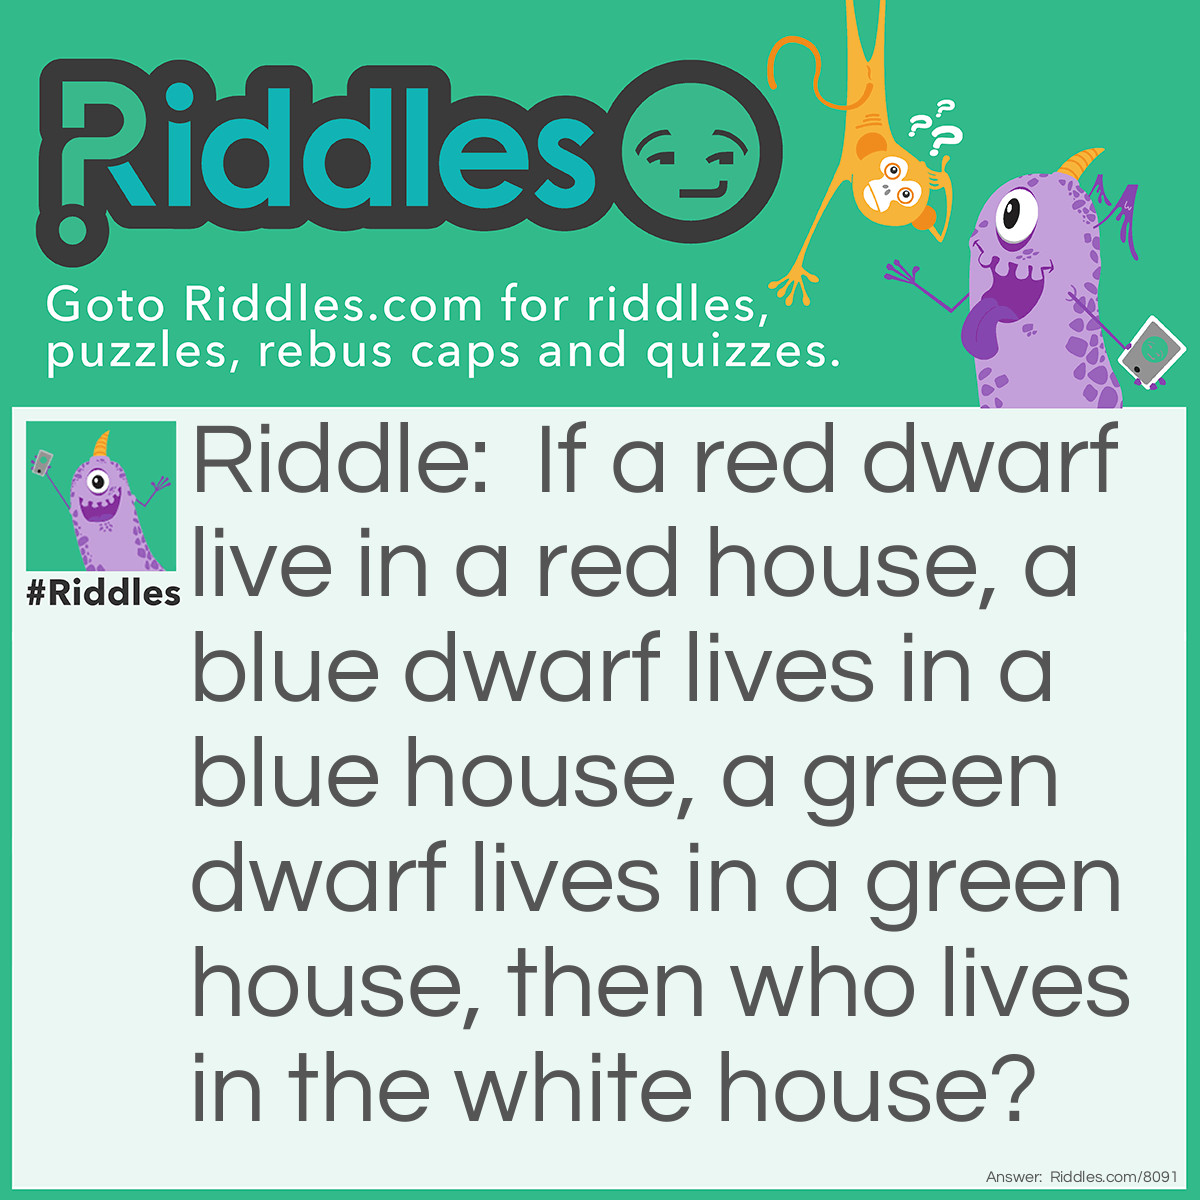 Riddle: If a red dwarf live in a red house, a blue dwarf lives in a blue house, a green dwarf lives in a green house, then who lives in the white house? Answer: The President!